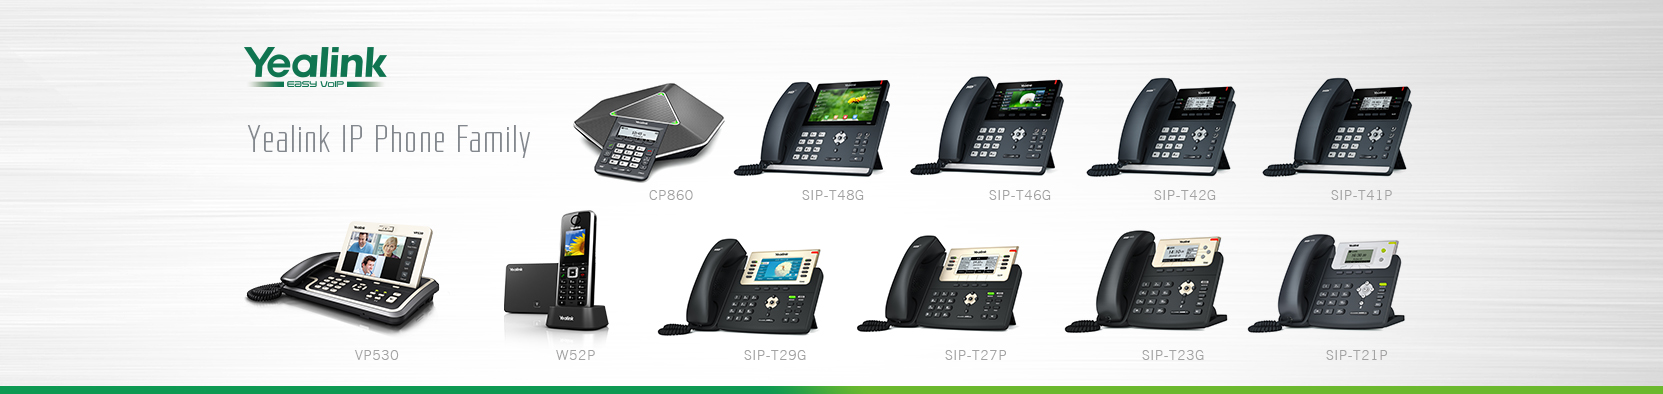 Yealink VoIP Phones Fit Every Need In Your Office - VoIP Insider